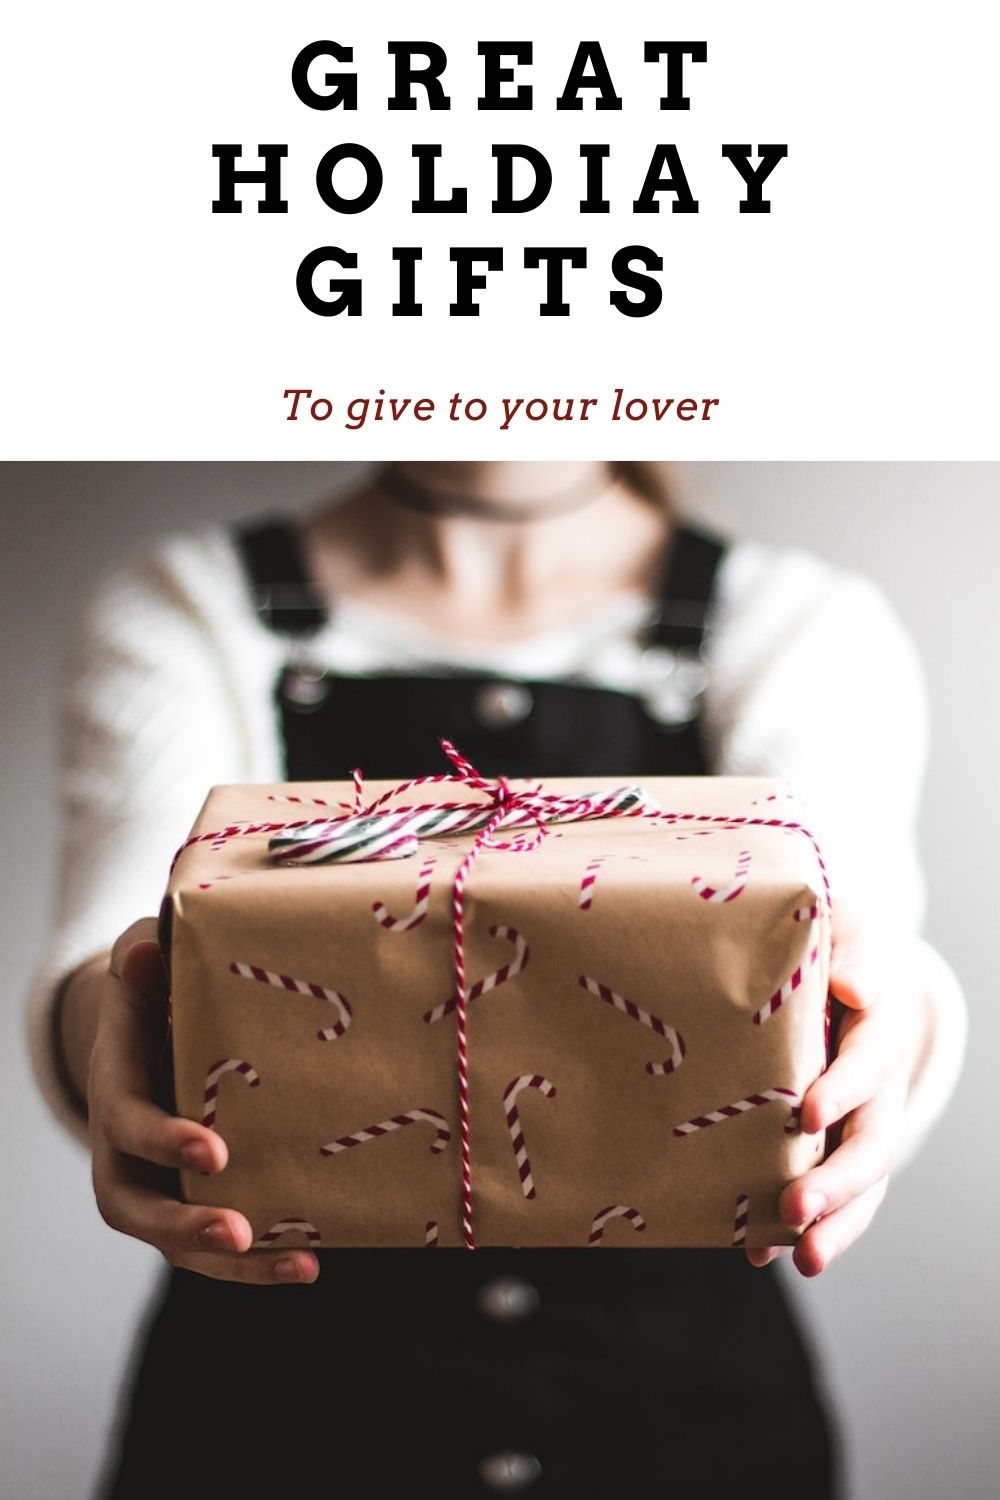 2021 Holiday Gift Guide graphic promoting "great Holiday gifts to give your lover"